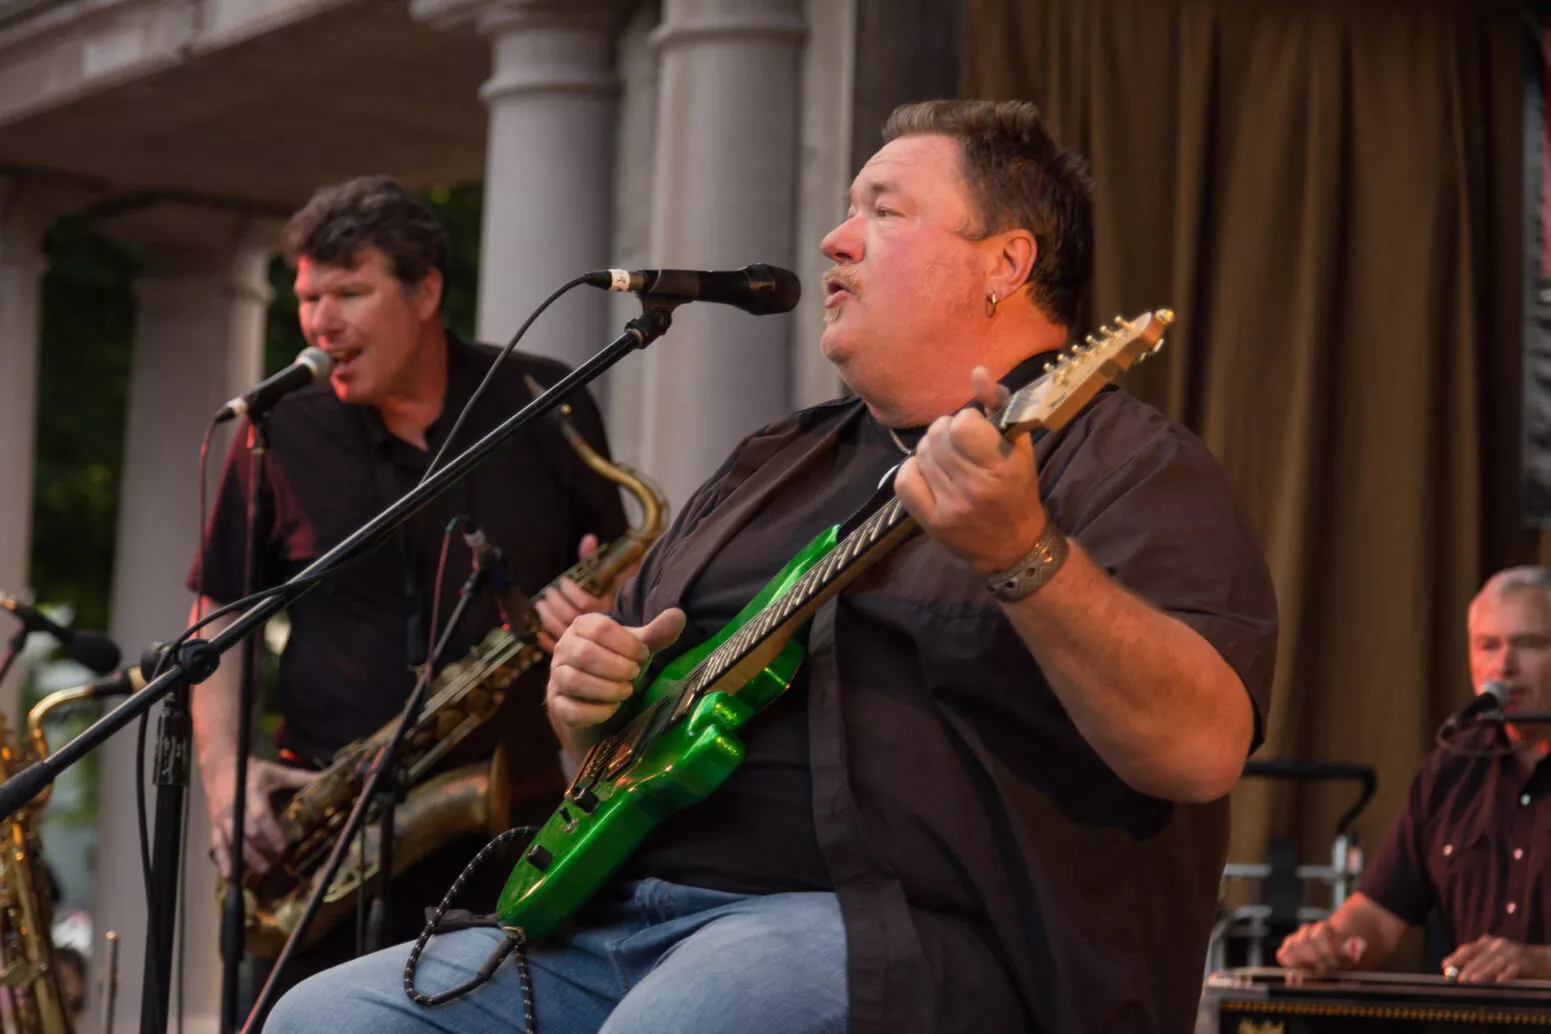 Big Mo performs with his band, Big Mo and The Full Moon Band, during Friday Night Concert, 2017.